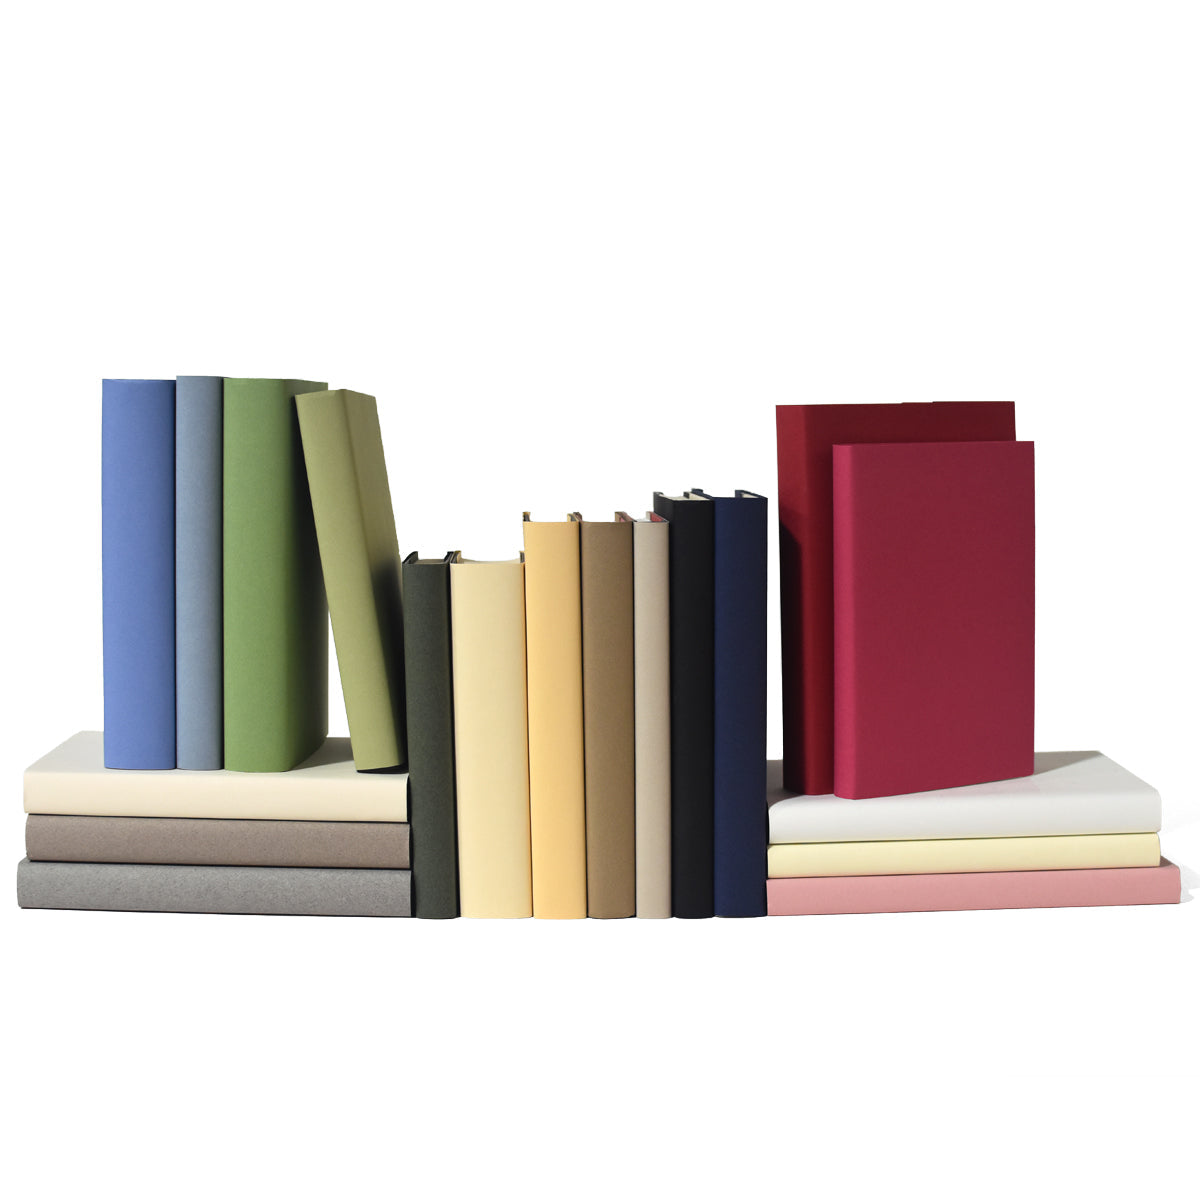 Add an unexpected visual interest to any shelf - color blocks of oversized paper-wrapped books! Each linear foot of books is hand-wrapped in fine, matte art paper. Juniper Custom Oversized Paper Wrapped Books by the Foot.